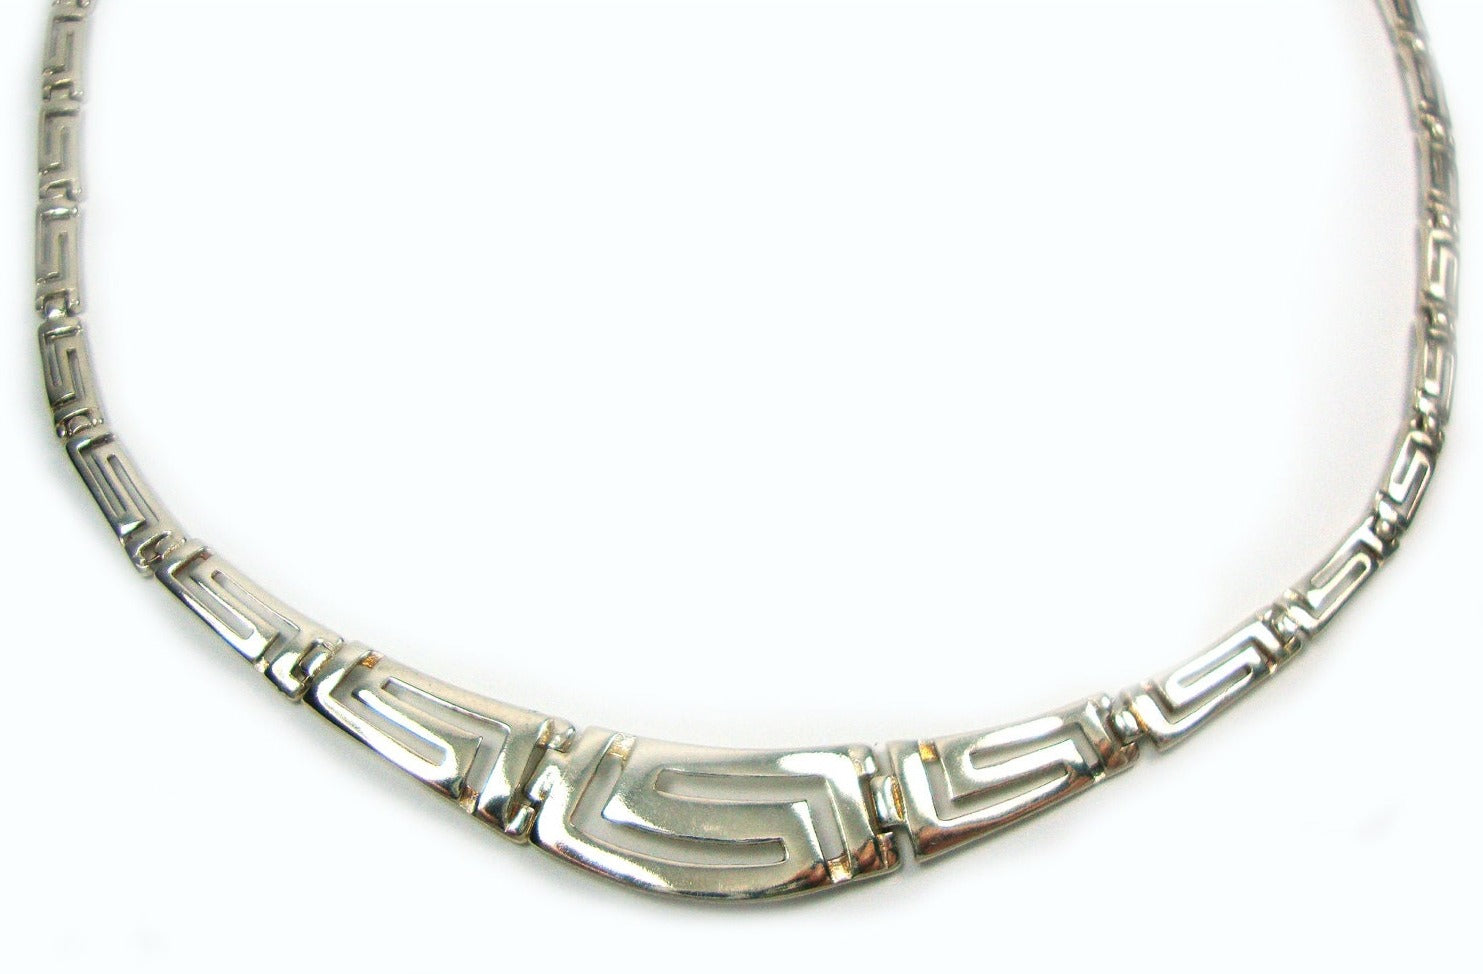 Sterling Silver 925 Greek Key Necklace with Ancient Greek Eternity Key Meander Design, available in lengths of 40 cm, 45 cm, and 50 cm.